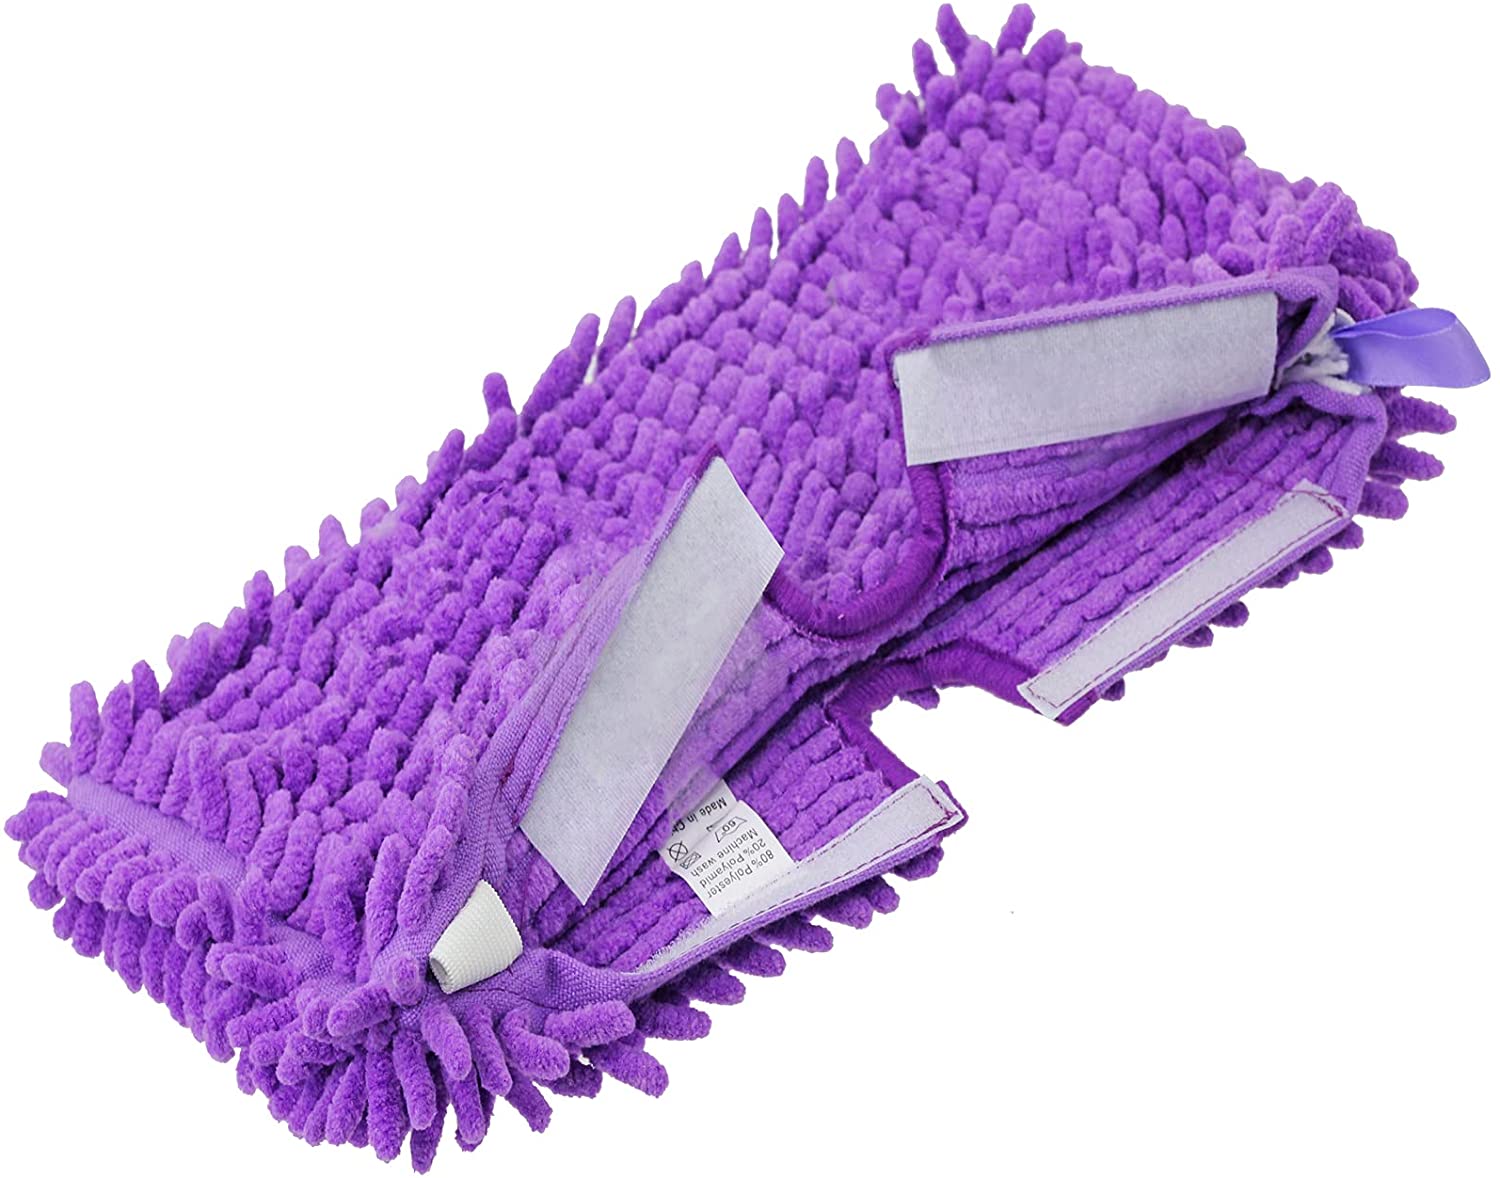 Steam Cleaner Cover Pads for Shark S3450 S3452 S3455K S3550 SE400 SE450 Mop (Pack of 6, Purple)